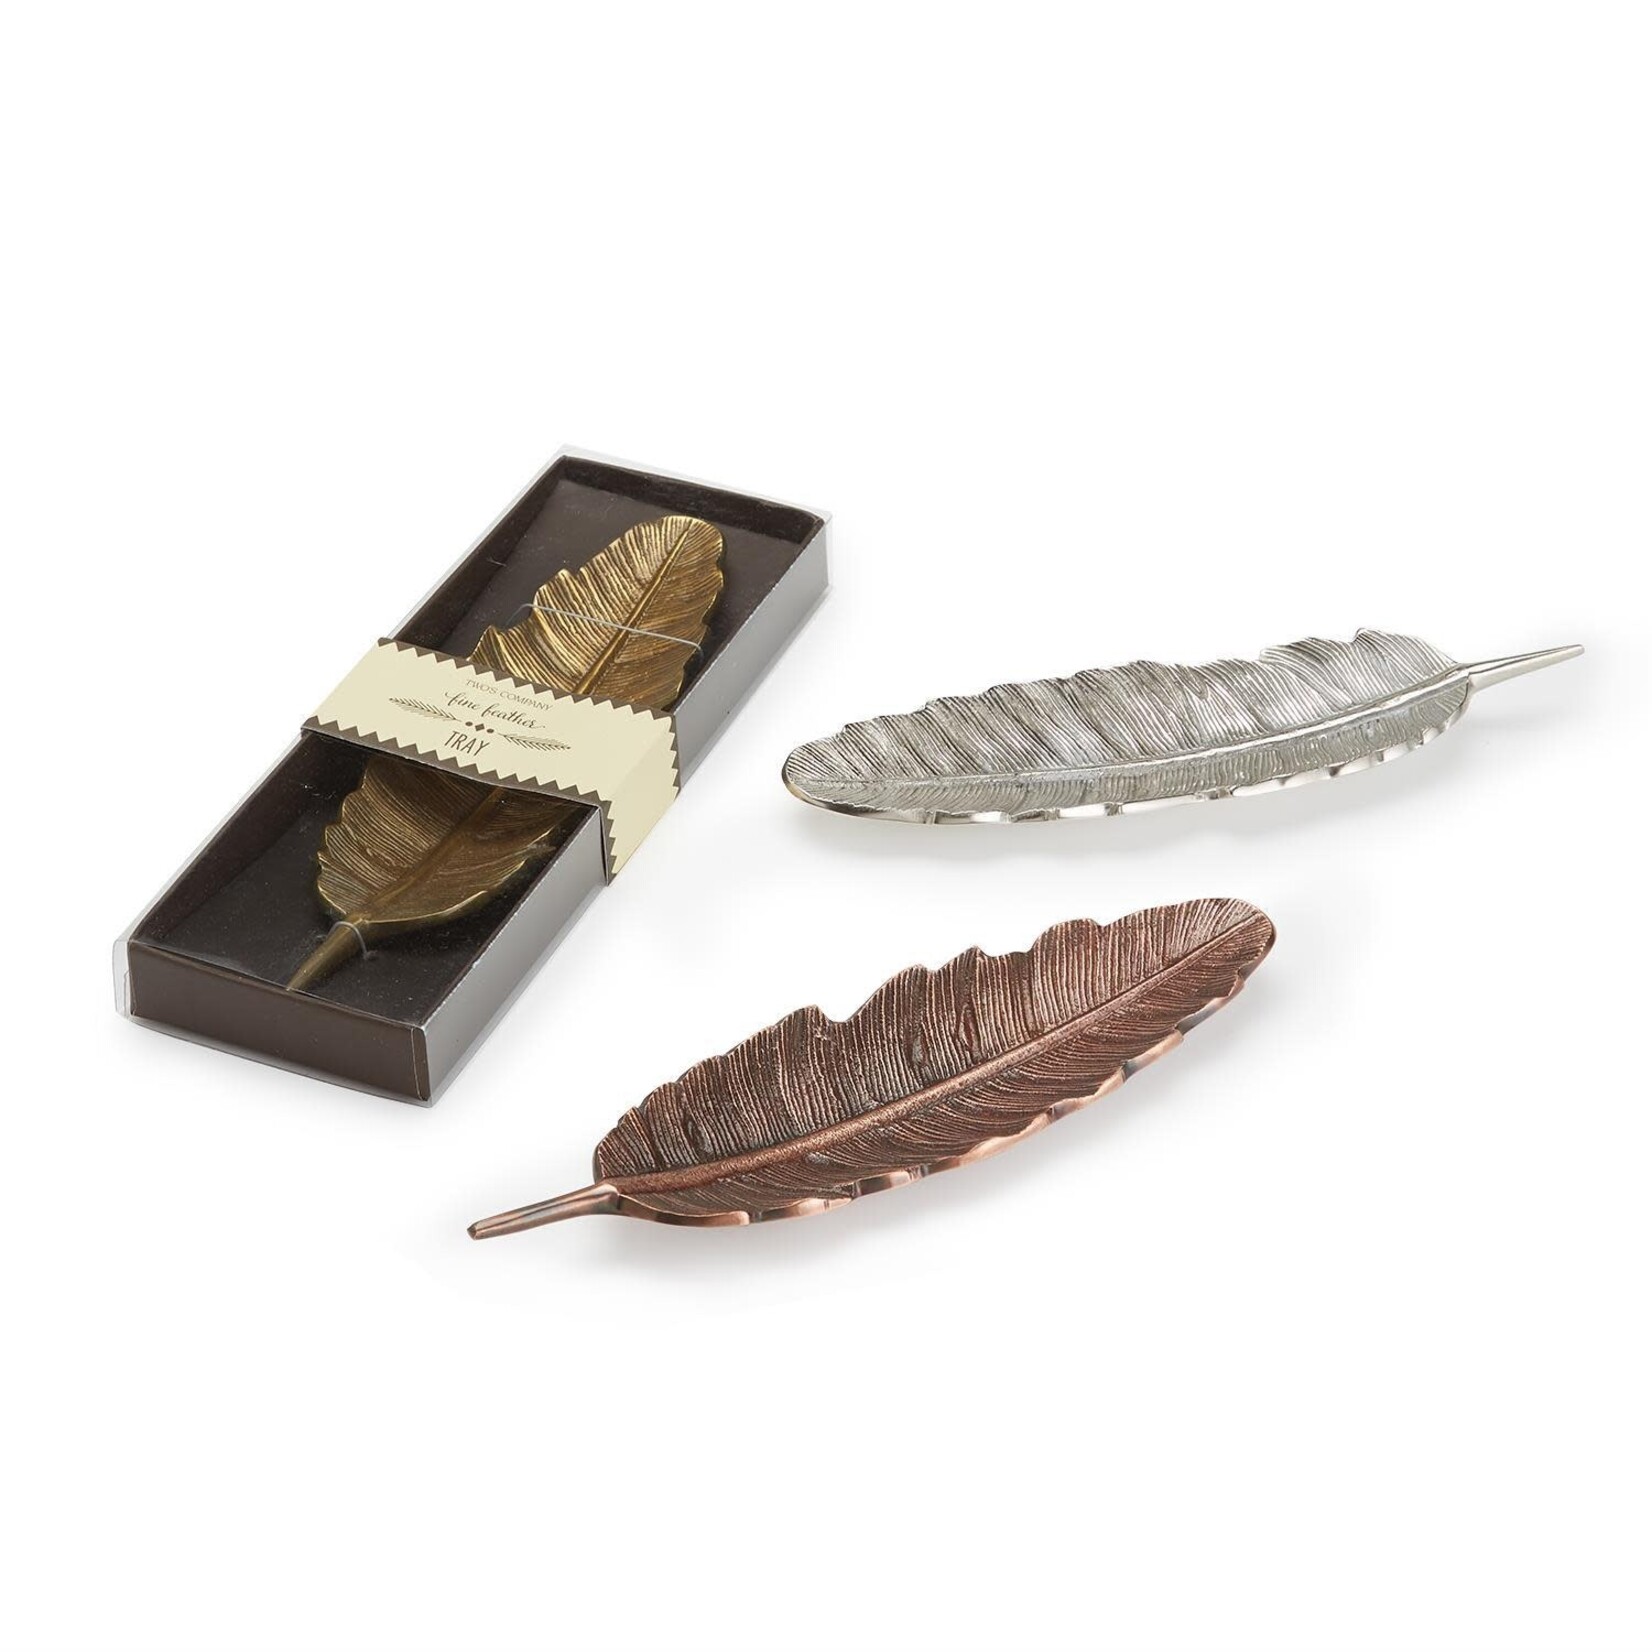 Two's Company Feather Tray